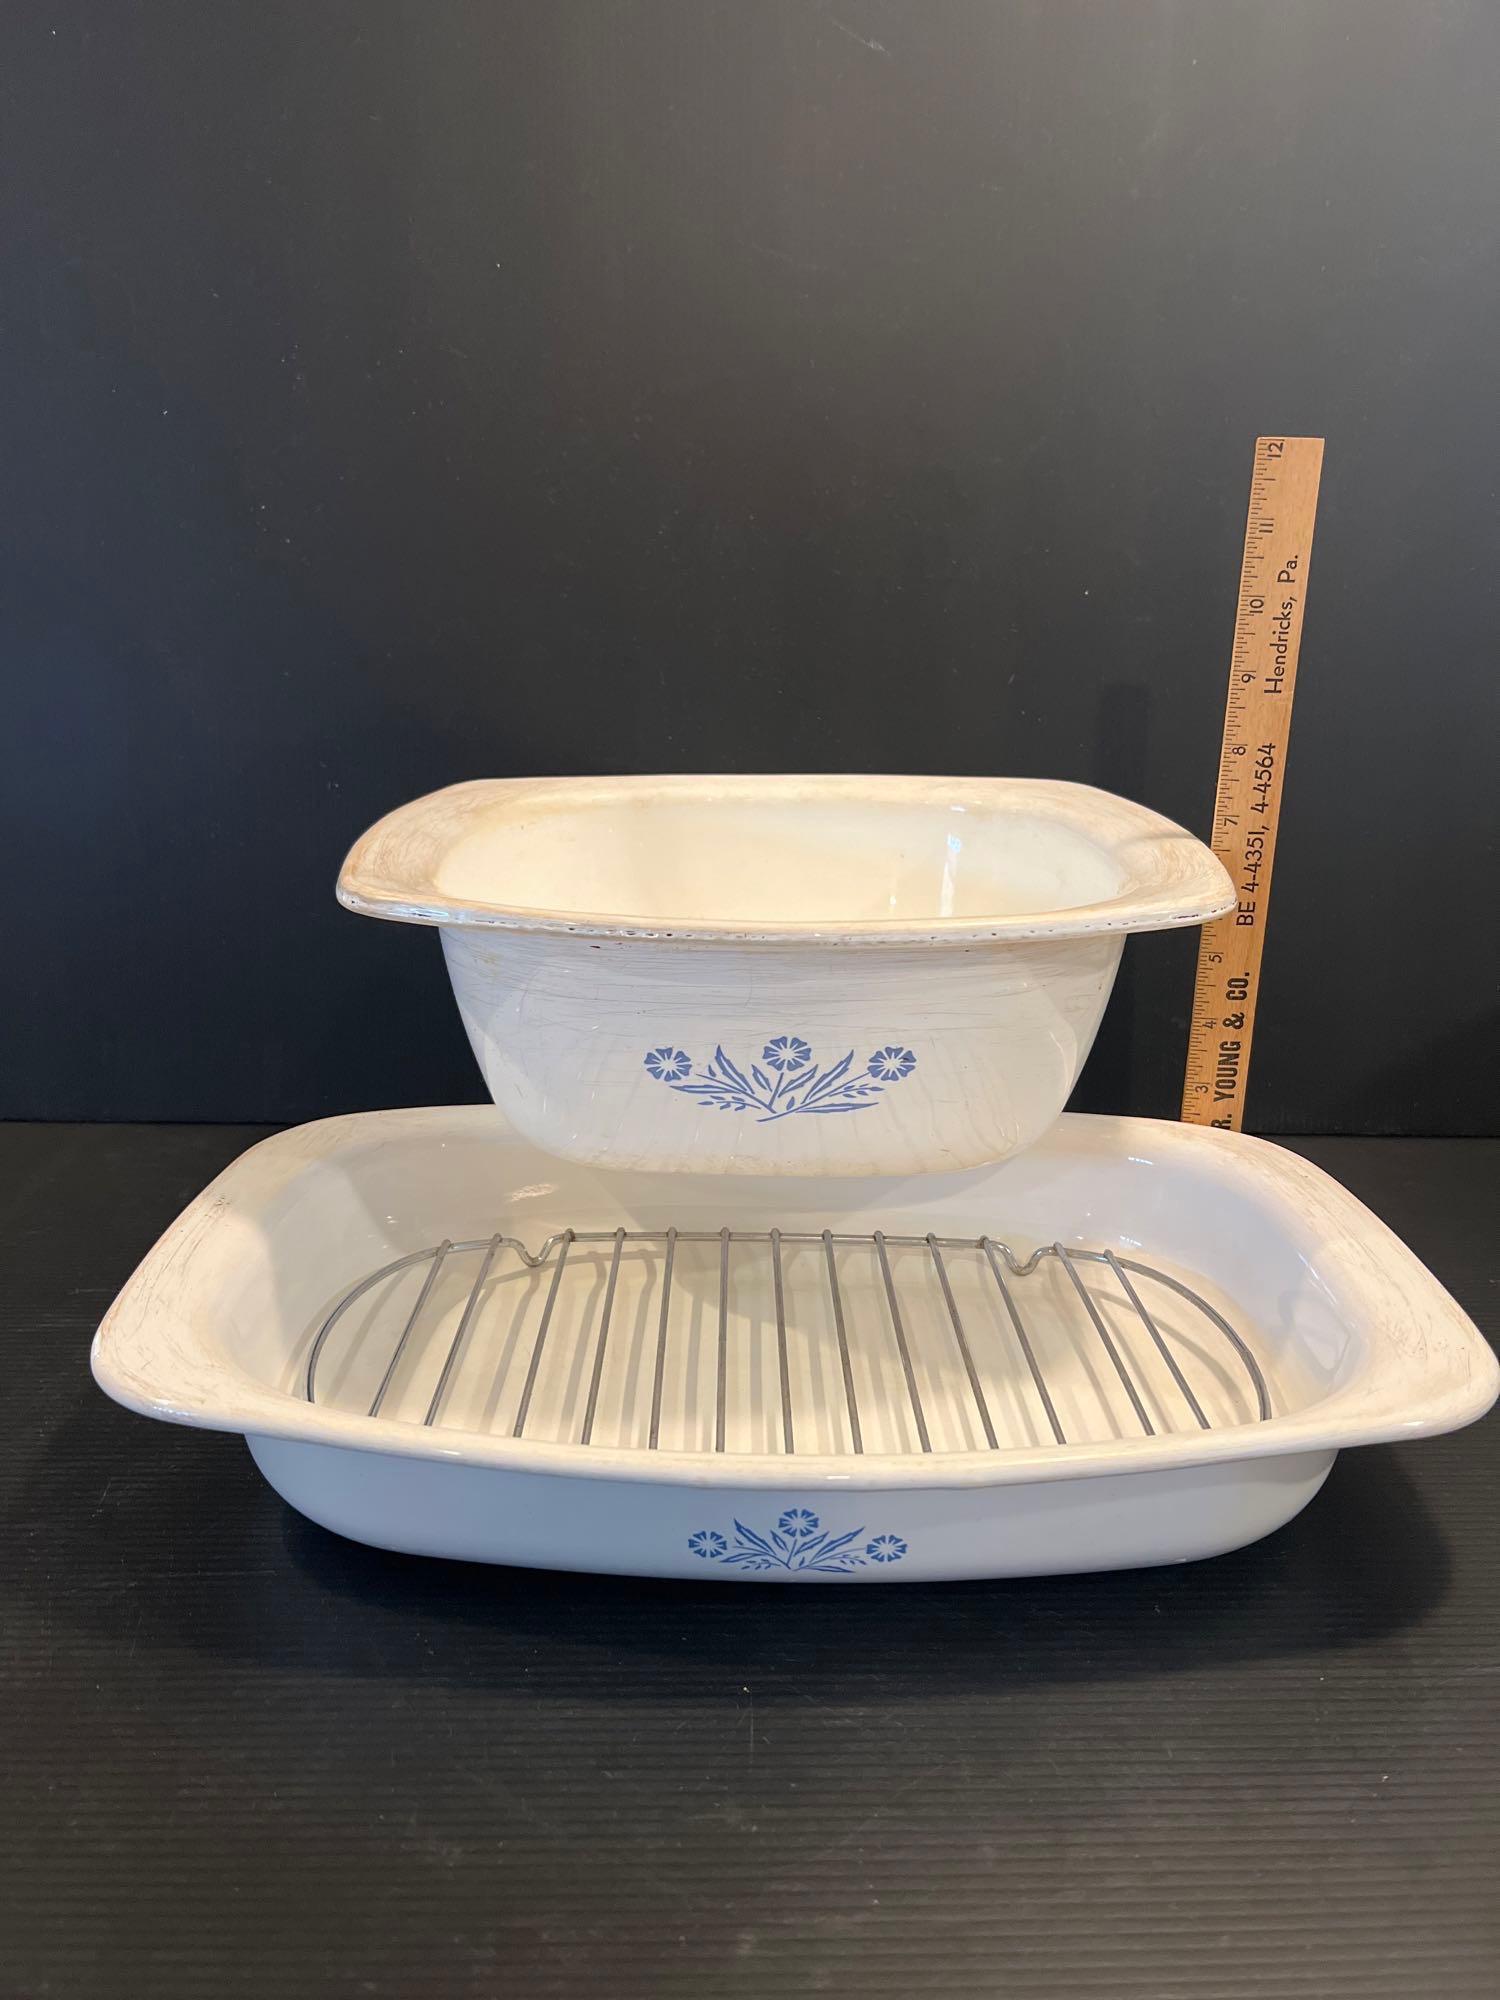 Corning Ware Roasting Pan with Wire Grate and Smaller Square Bowl